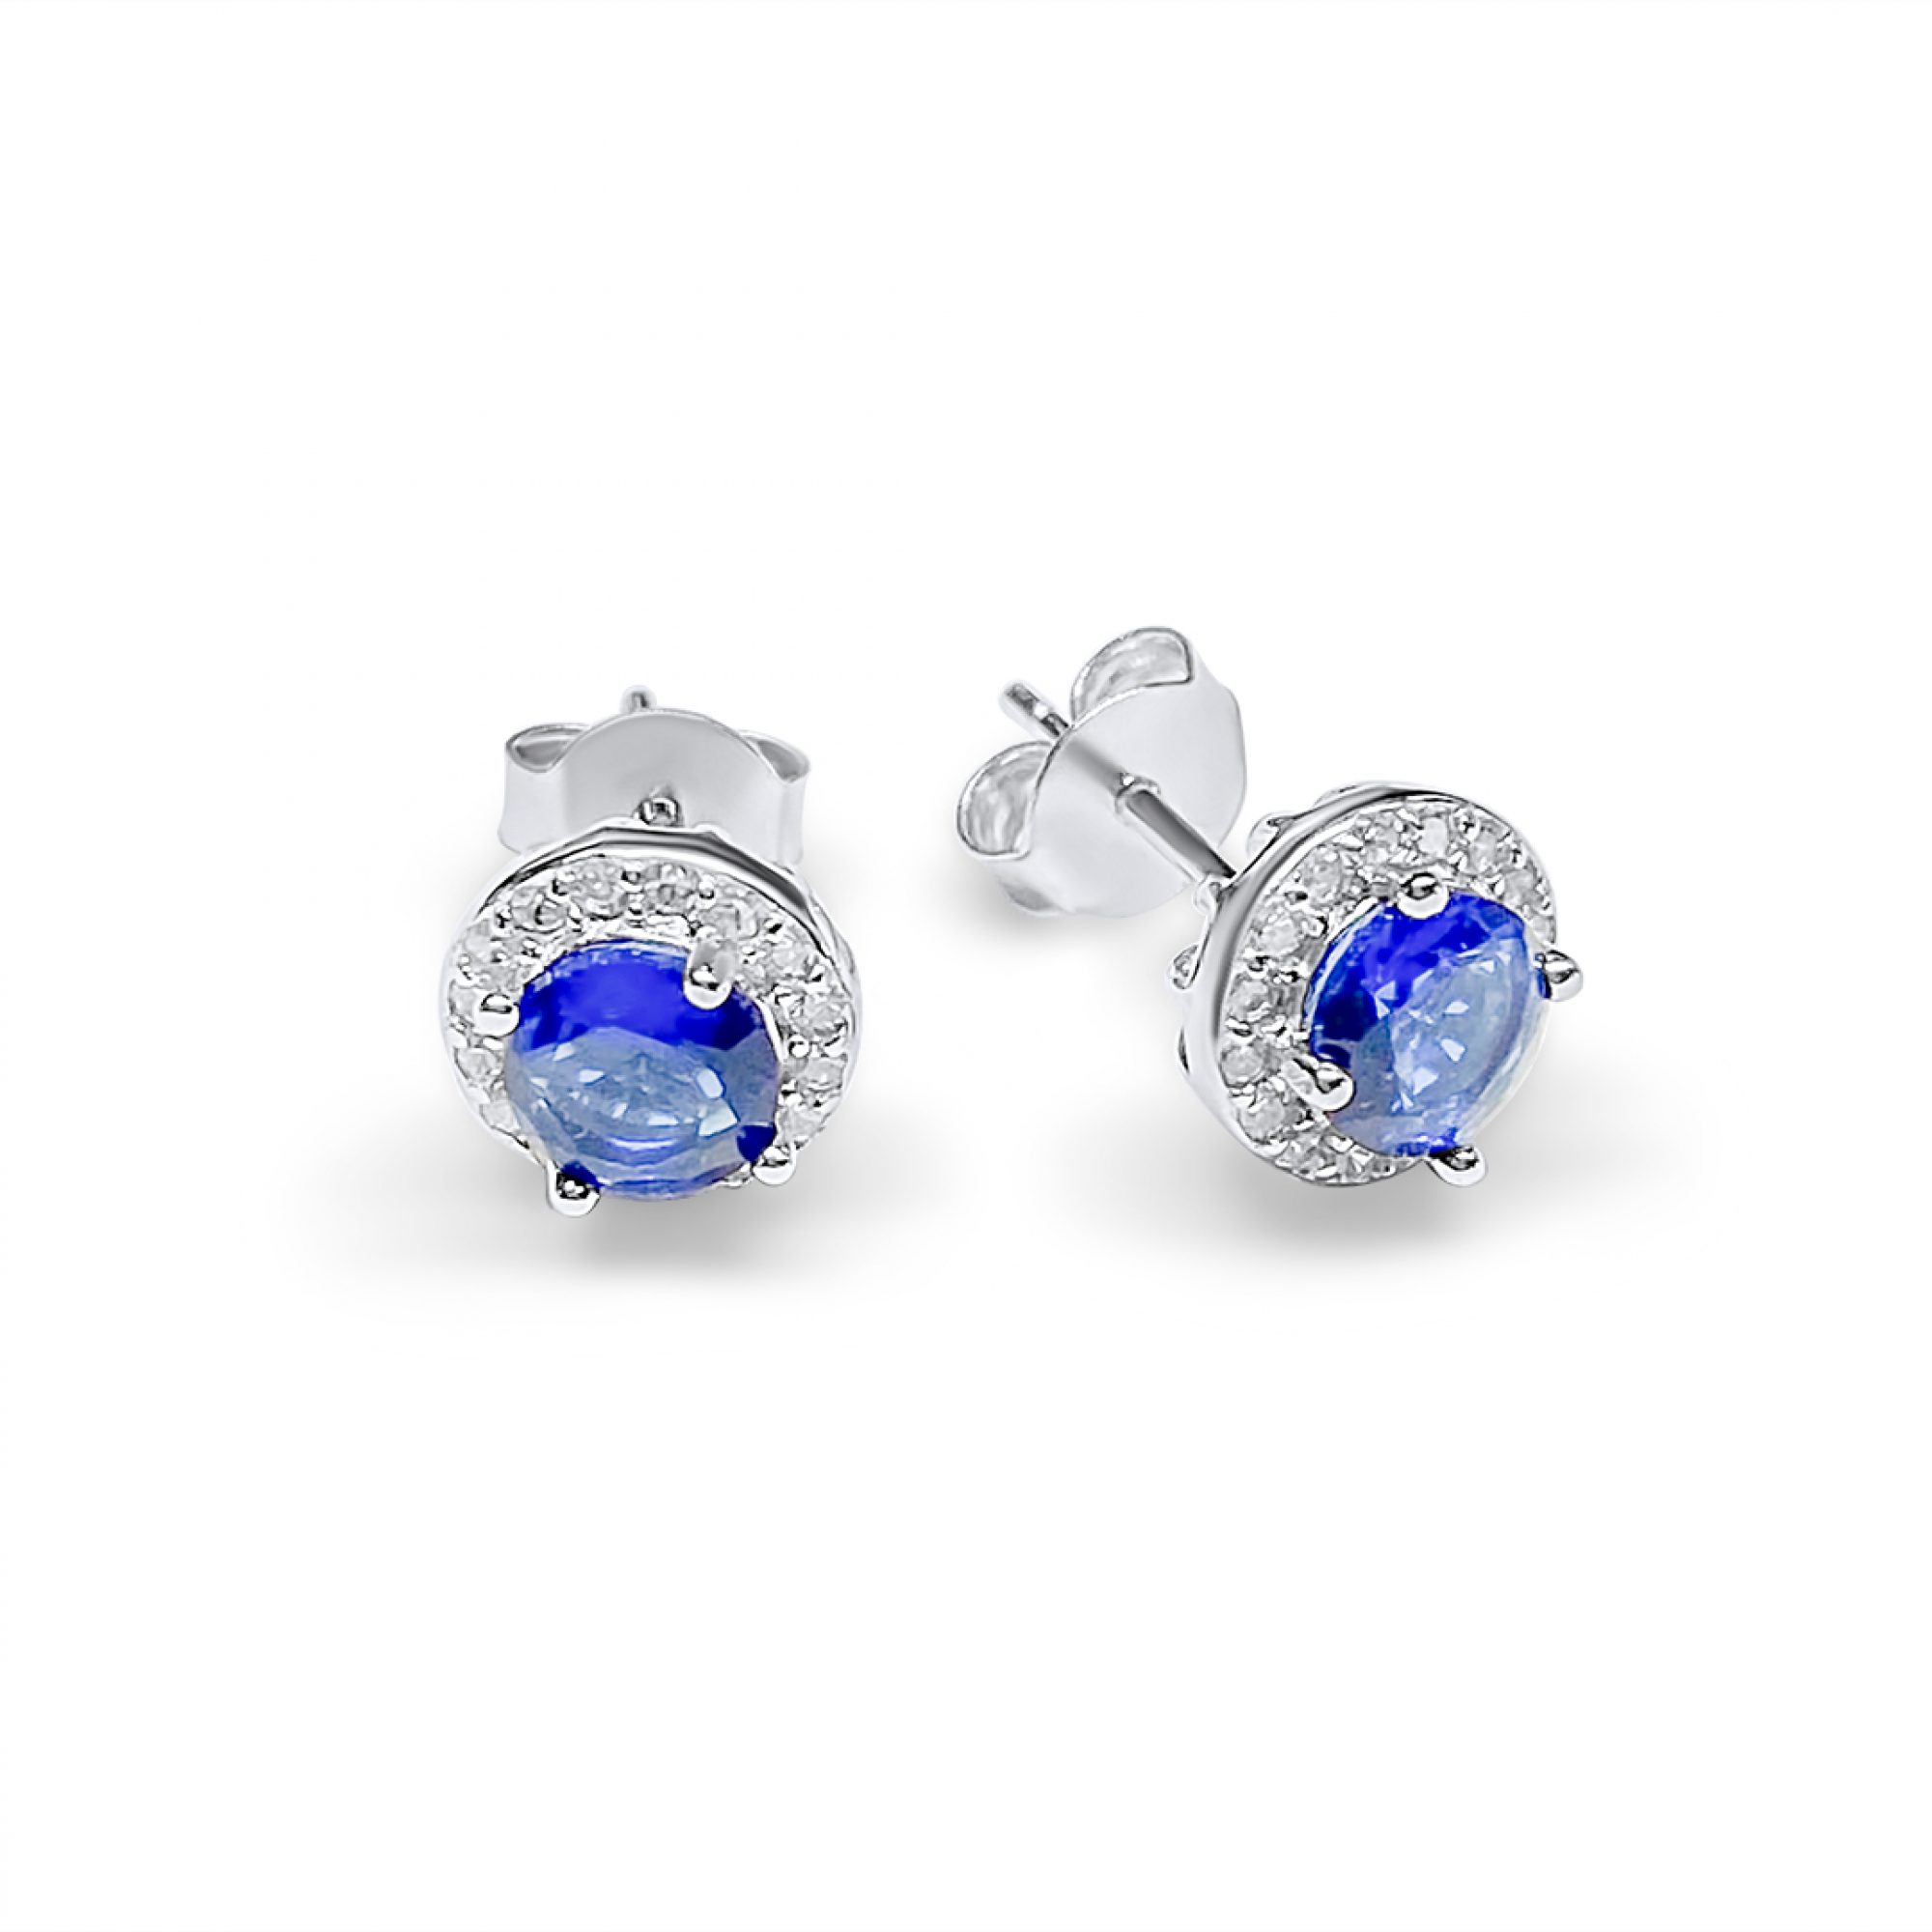 Silver stud earrings with sapphire and zircon stones